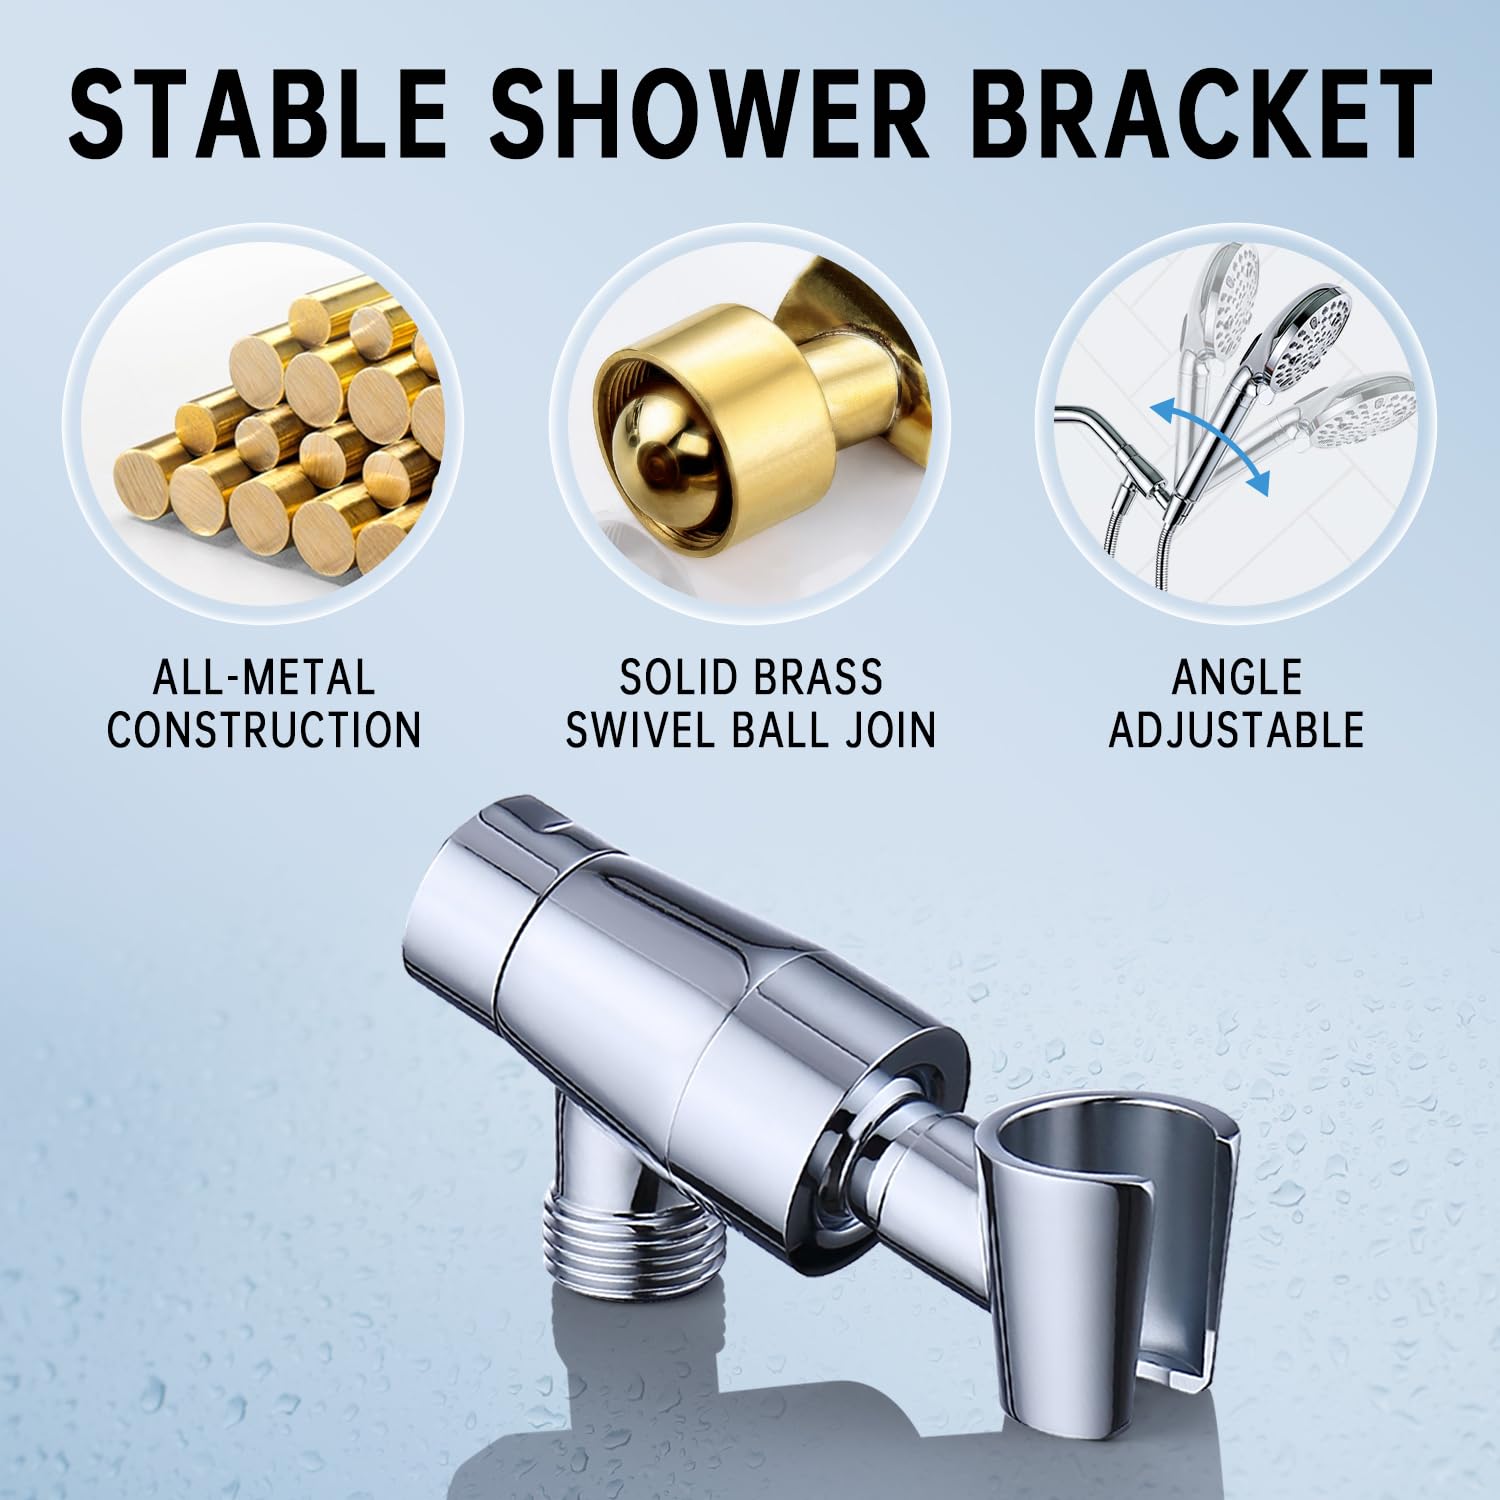 V-Frankness 10-Mode Filtered Shower Head| High Pressure Handheld ShowerHead with 70" Hose and Metal Adjustable Holder Combo| Hard Water Softener to Remove Chlorine and Heavy Metals (Chrome)